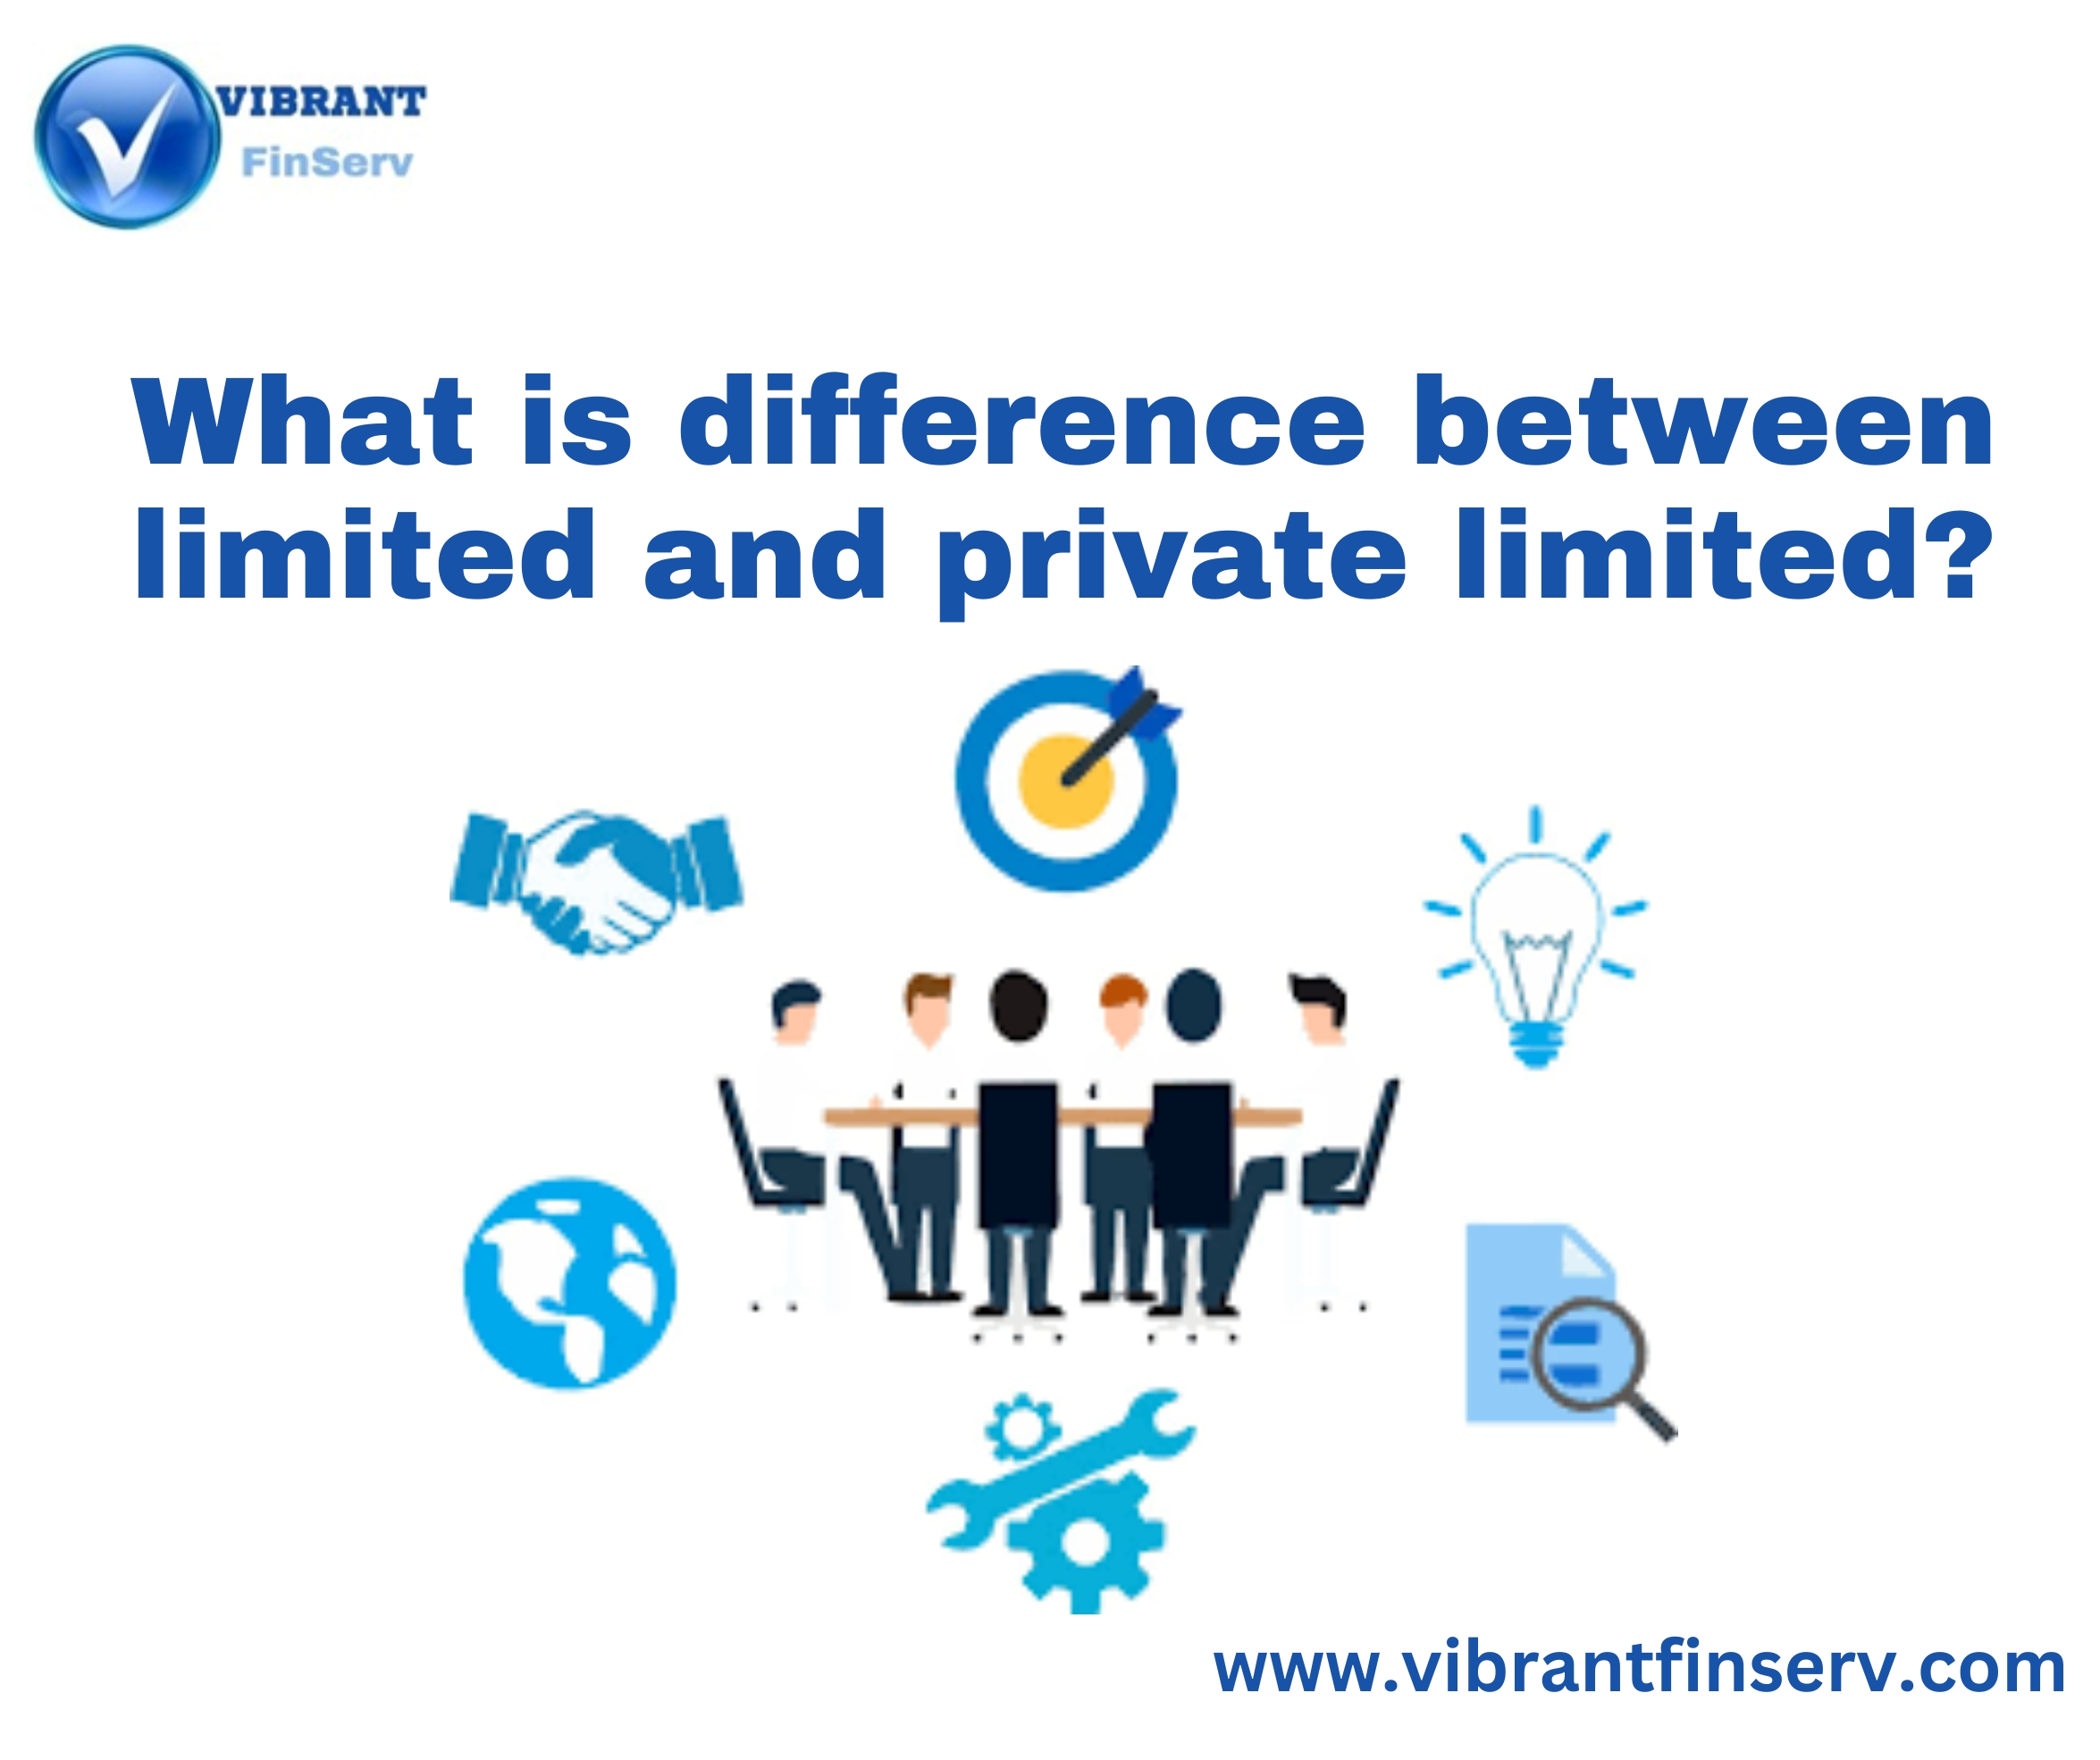 Difference between limited and private limited